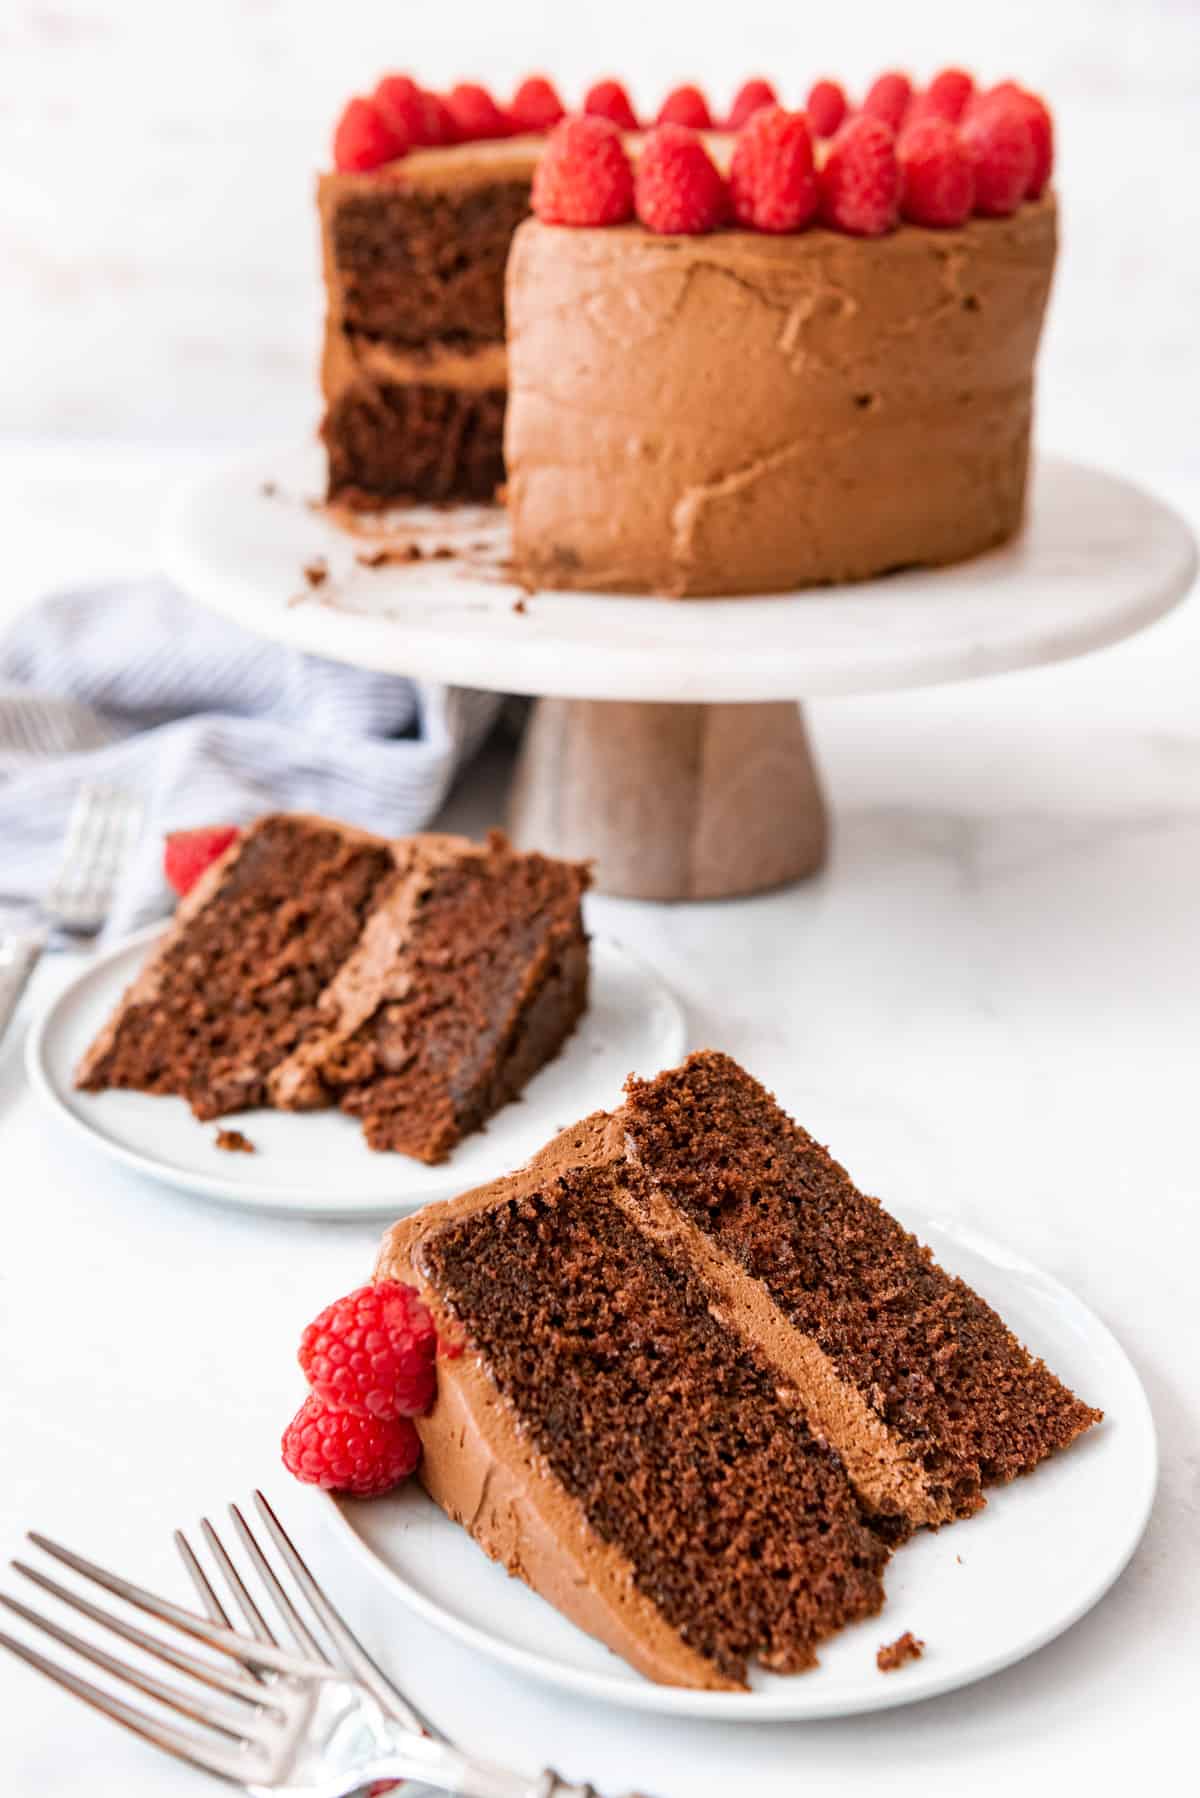 A slice of chocolate cake removed from the whole and placed on a white plate below a cake stand.